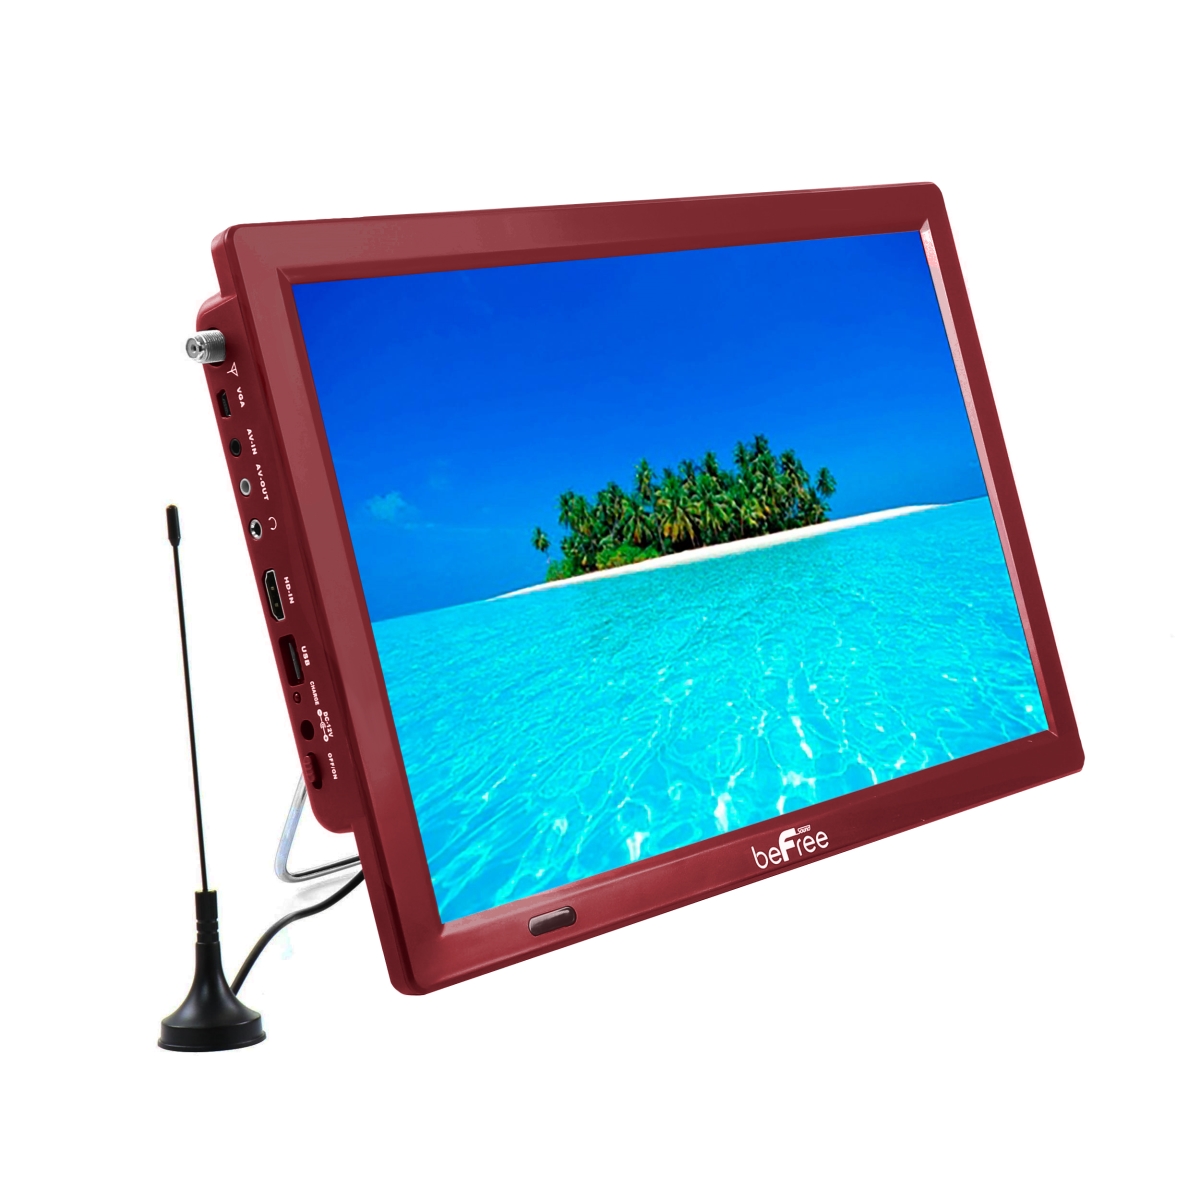 BFS-TV14-RED 14 in. Portable Rechargeable LED TV with HDMI, SD-MMC & USB - VGA, AV In-Out & Built-in Digital Tuner - Red -  Befree Sound